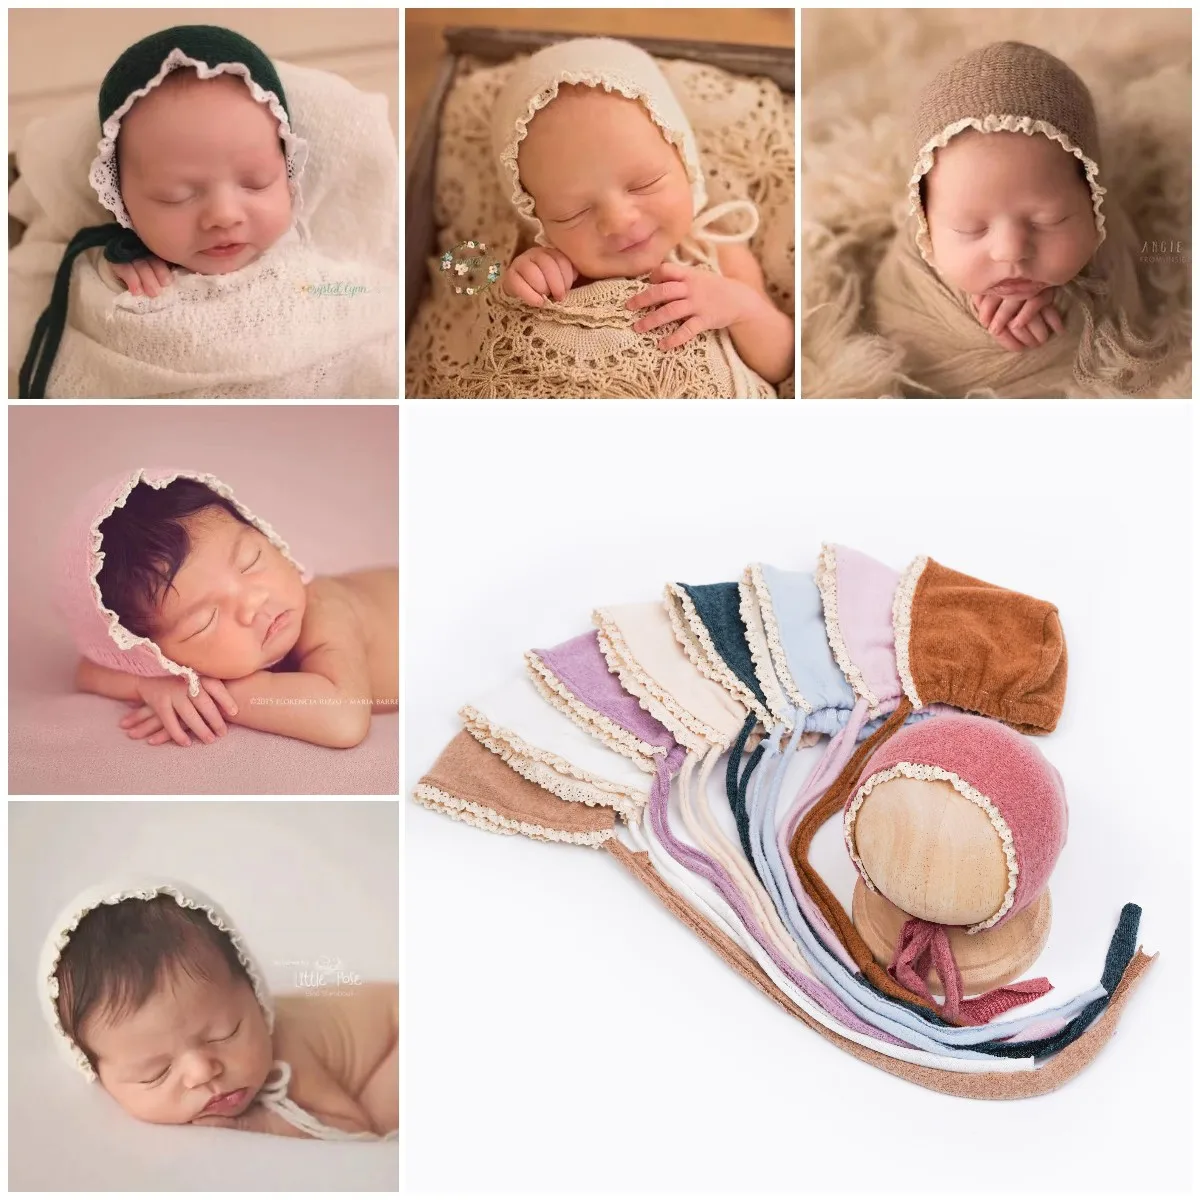 

Baby Cotton Lace Knitted Hat,Infant Photography Prop,Newborn Baby Girl Headdress,for Kid Photo Studio Shoot Hairband Accessories